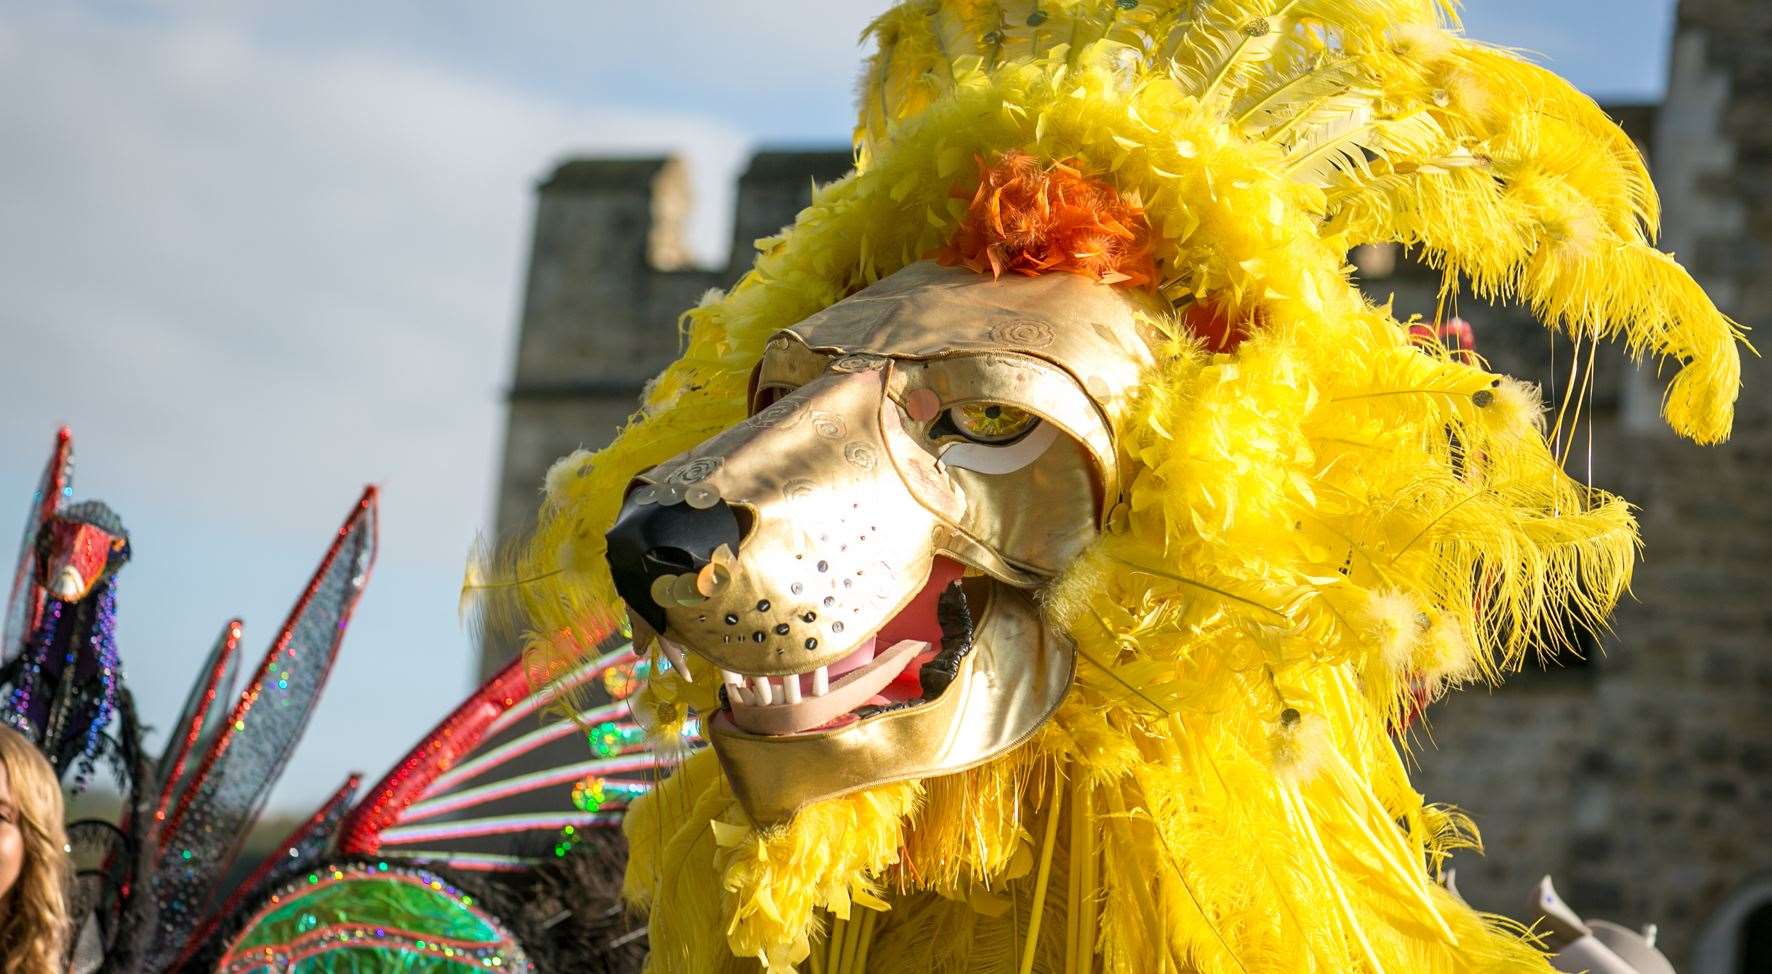 Visitors will be treated to a whole weekend of family friendly activities including authentic re-enactment shows, pop-up music performances, large-scale costumes and a dazzling riot of colour and celebration.